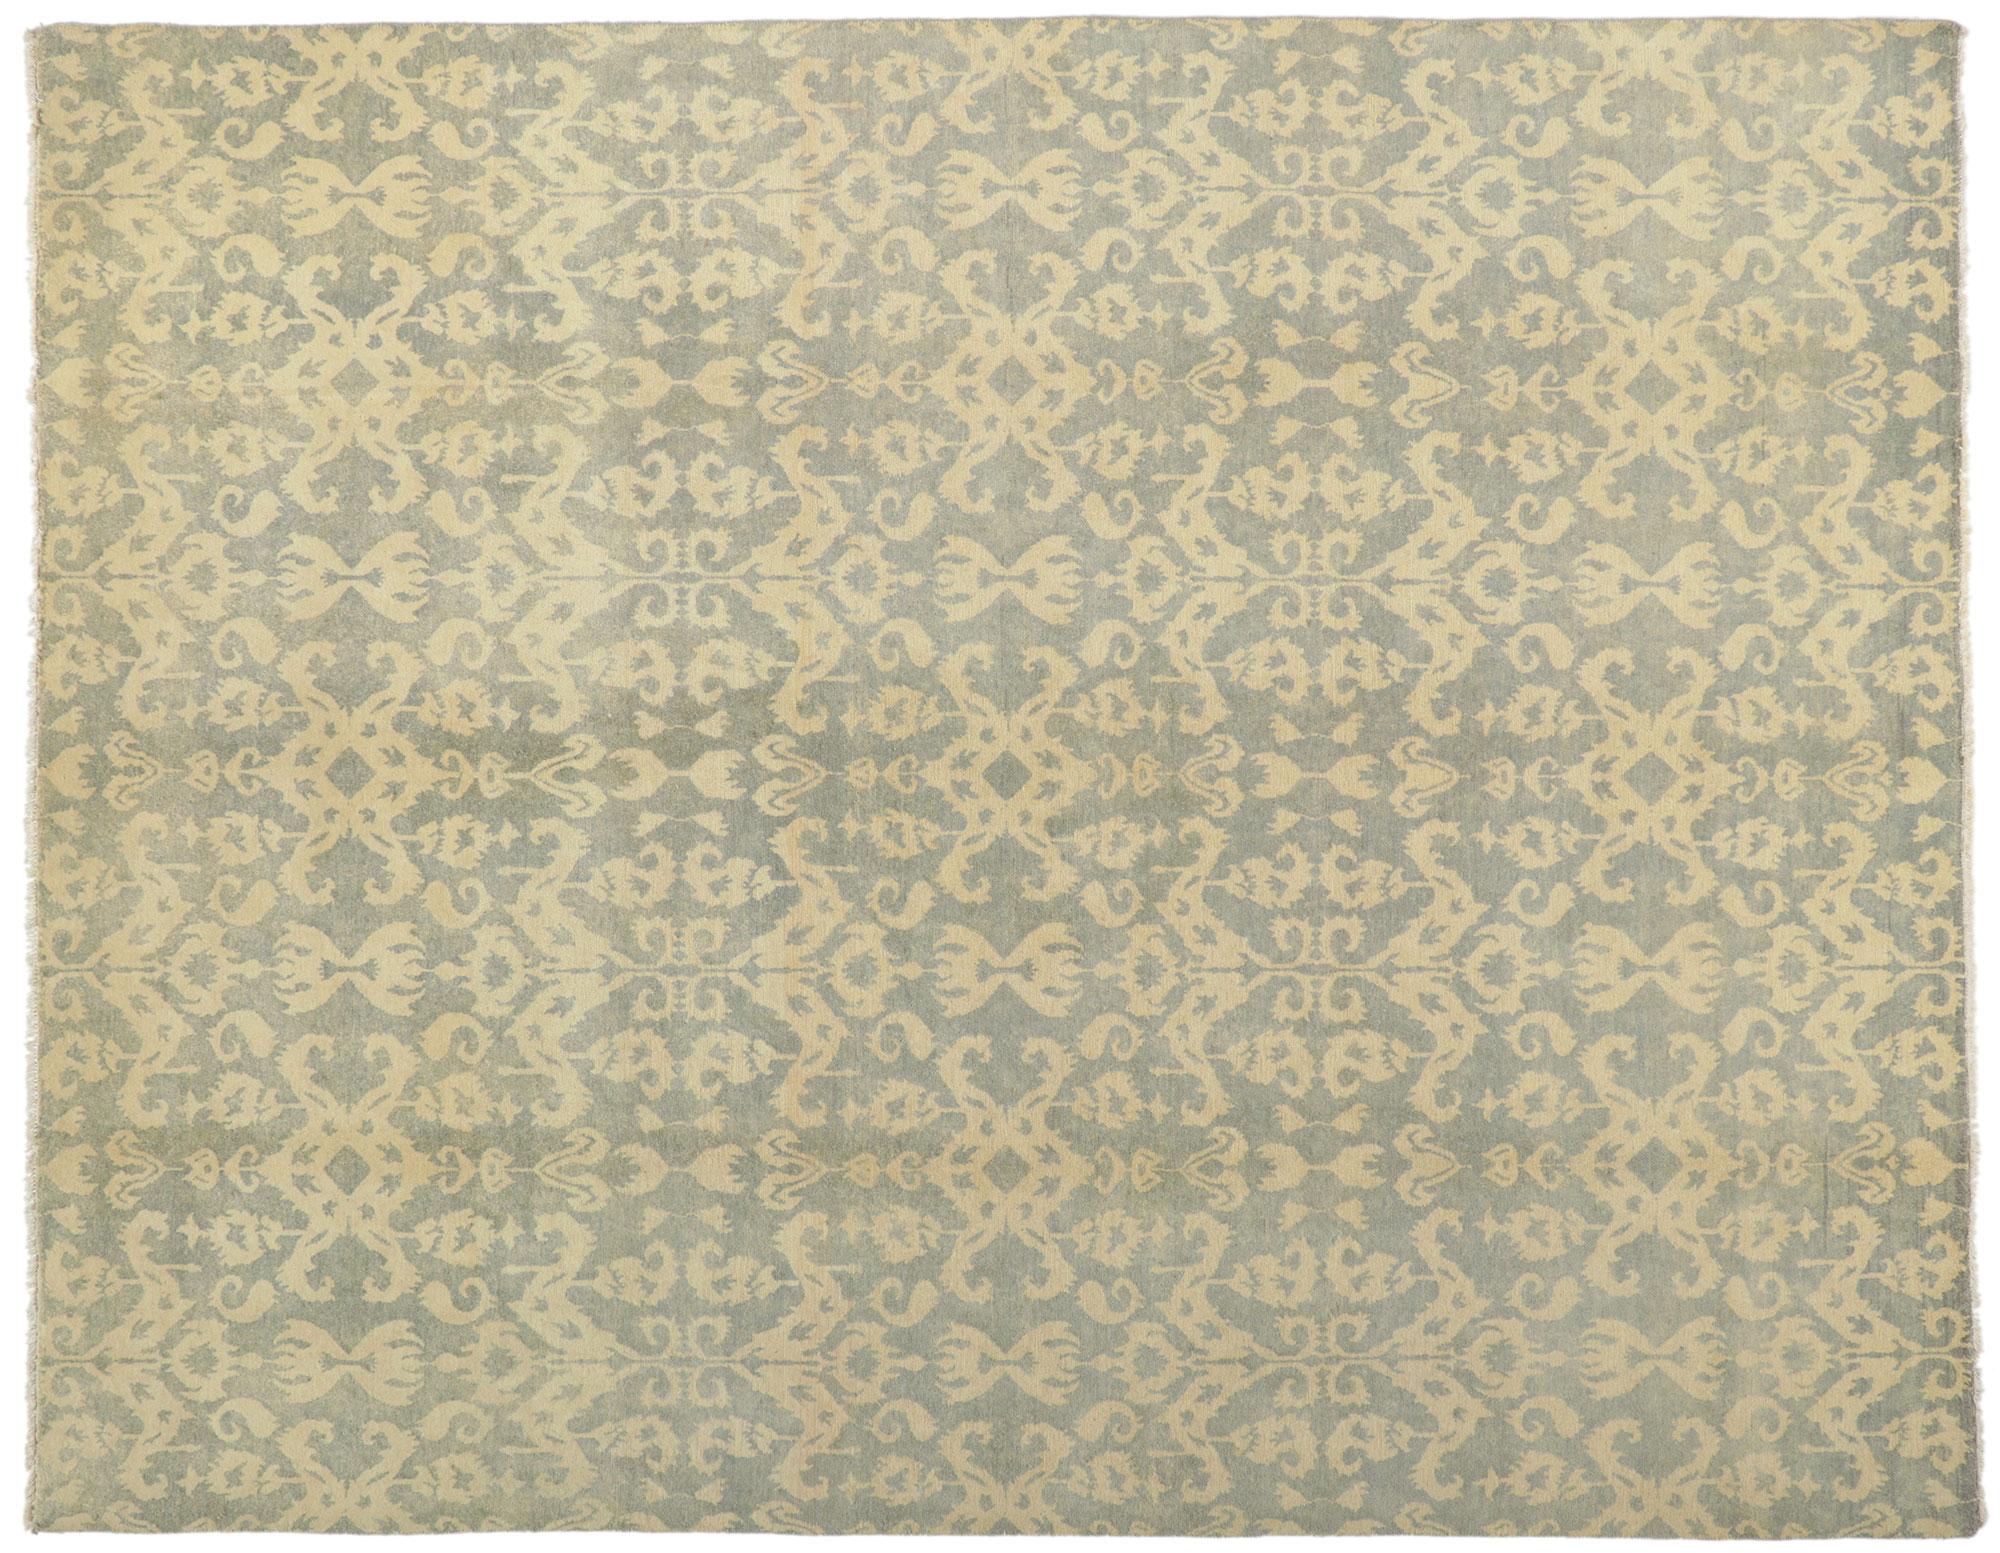 New Transitional Ikat Area Rug with Soft Earth-Tone Colors For Sale 2